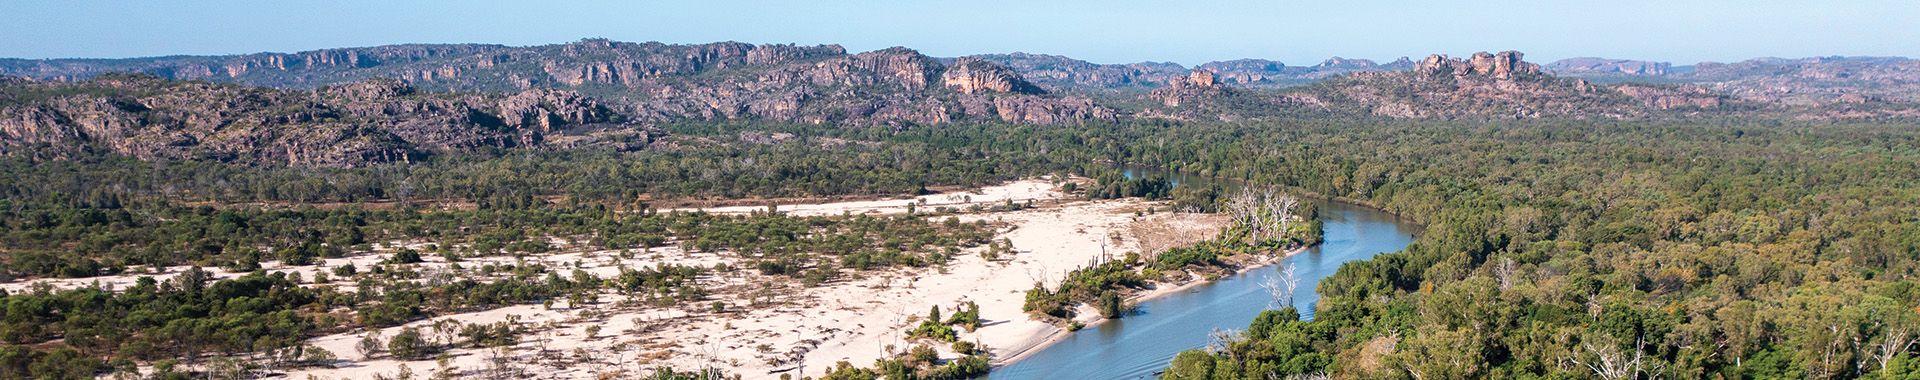 Top 10 Natural Wonders in the Northern Territory